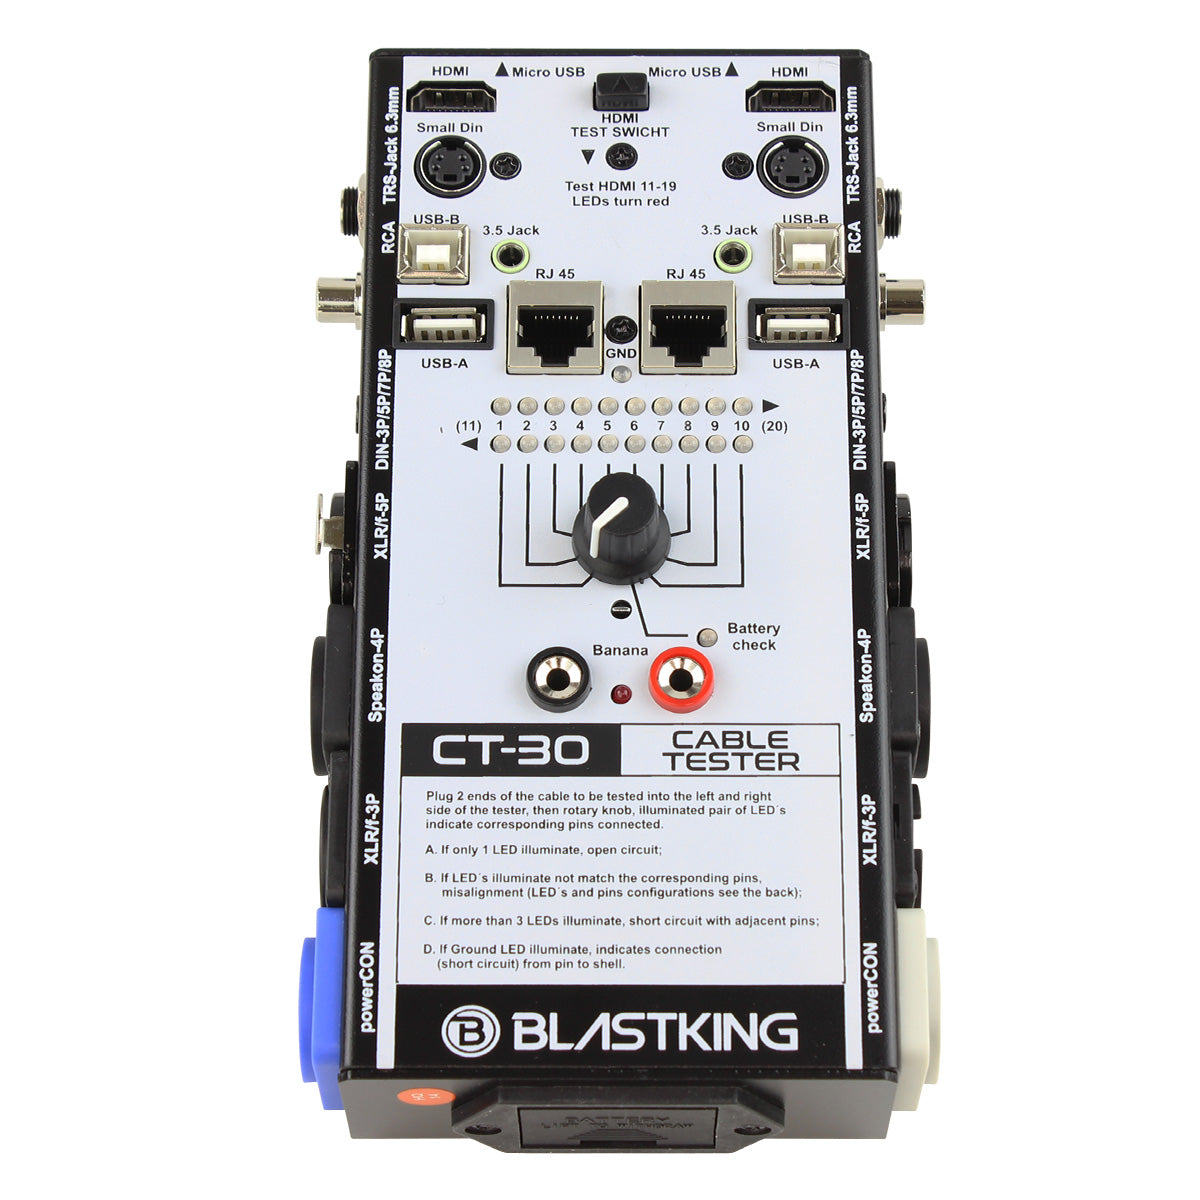 Blastking CT-30 Cable Tester